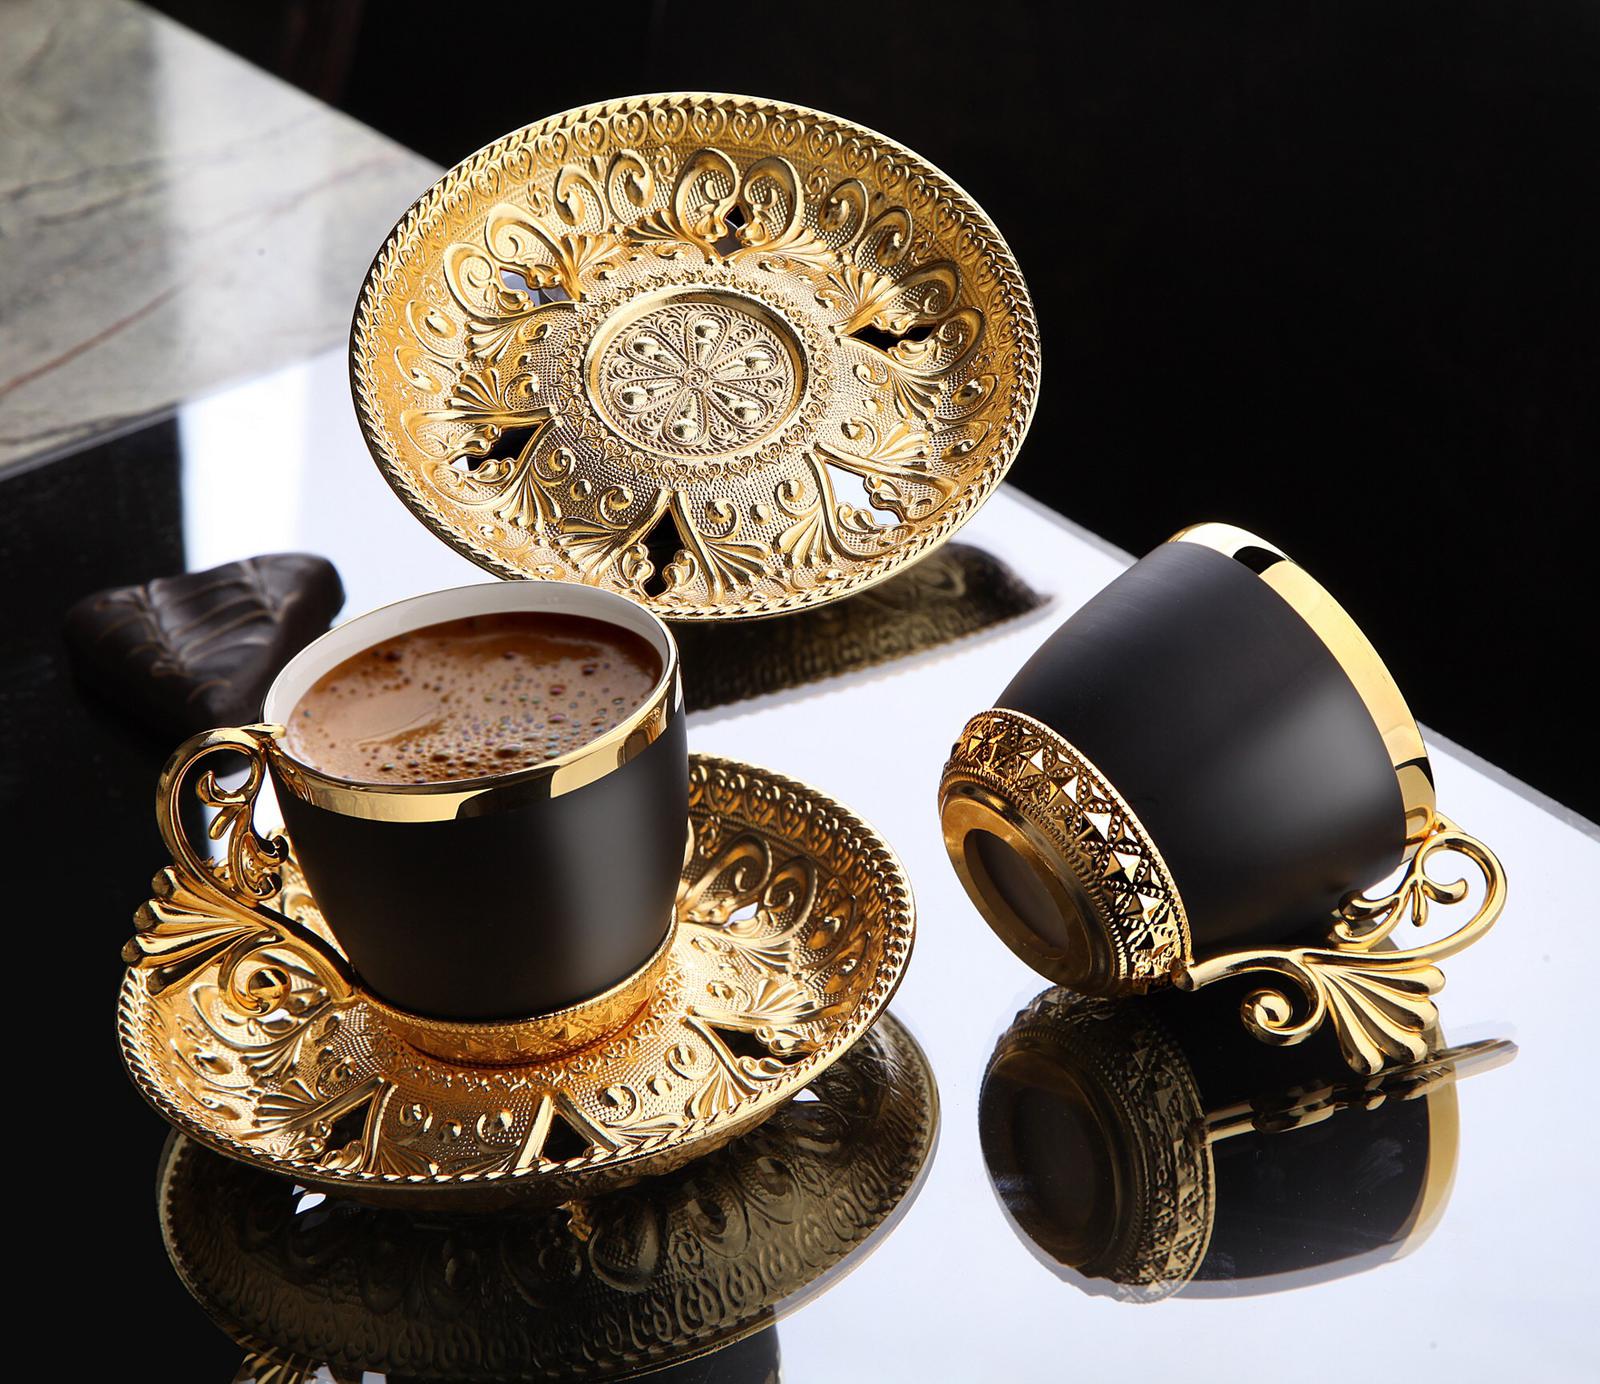 Copper Turkish Coffee Espresso Serving Set Authentic Coffee Cup